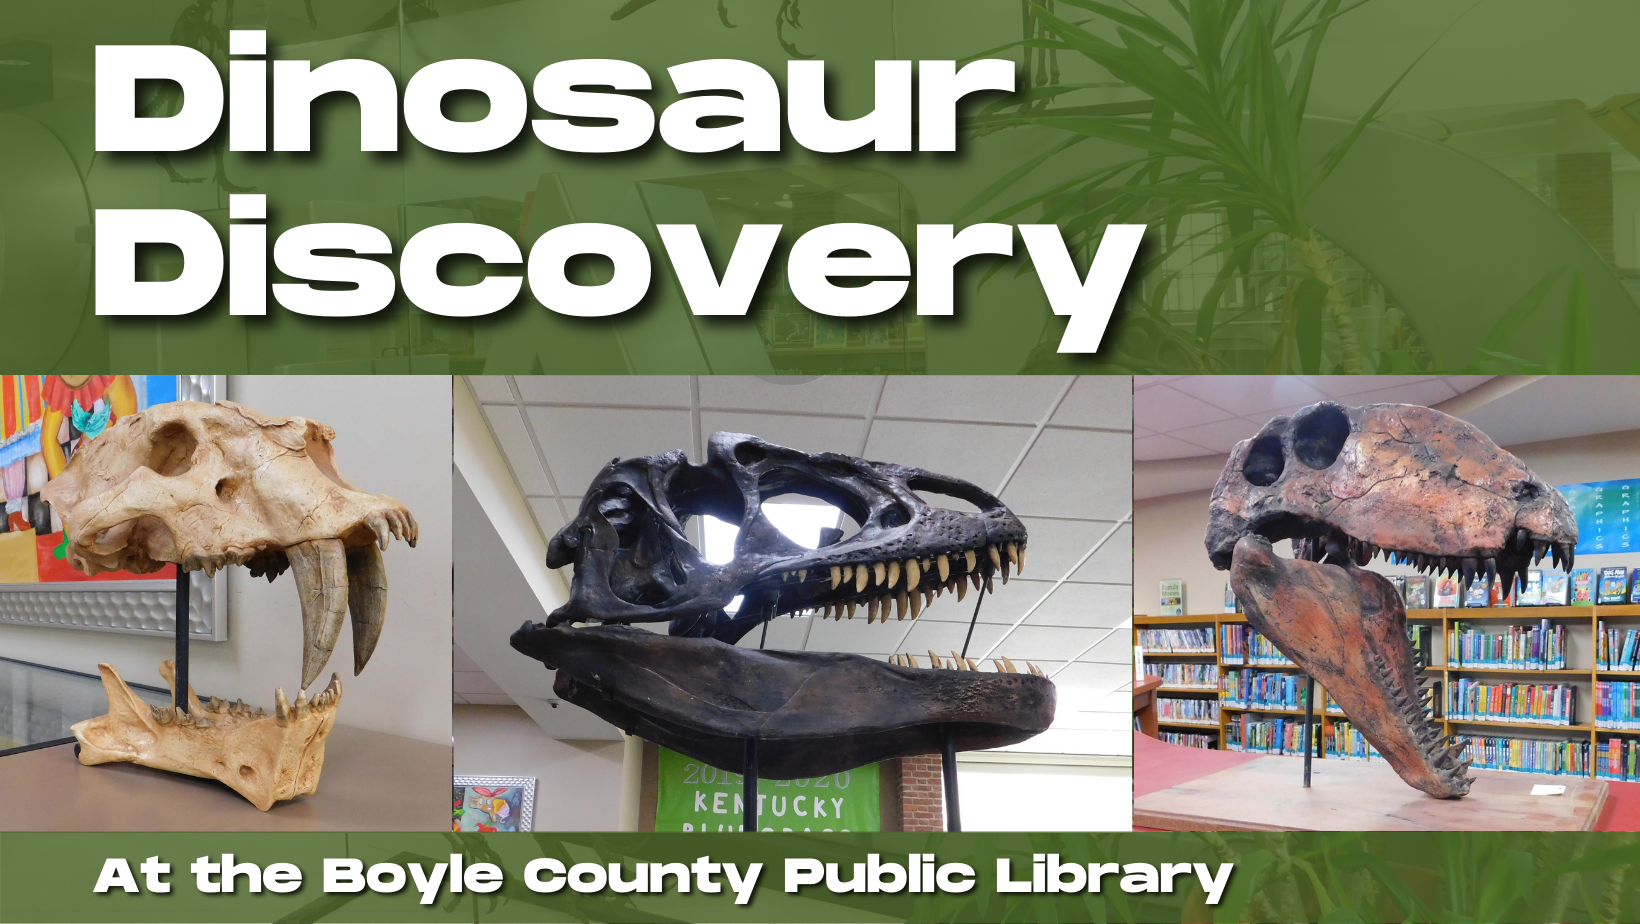 Dinosaur Discovery at the Library